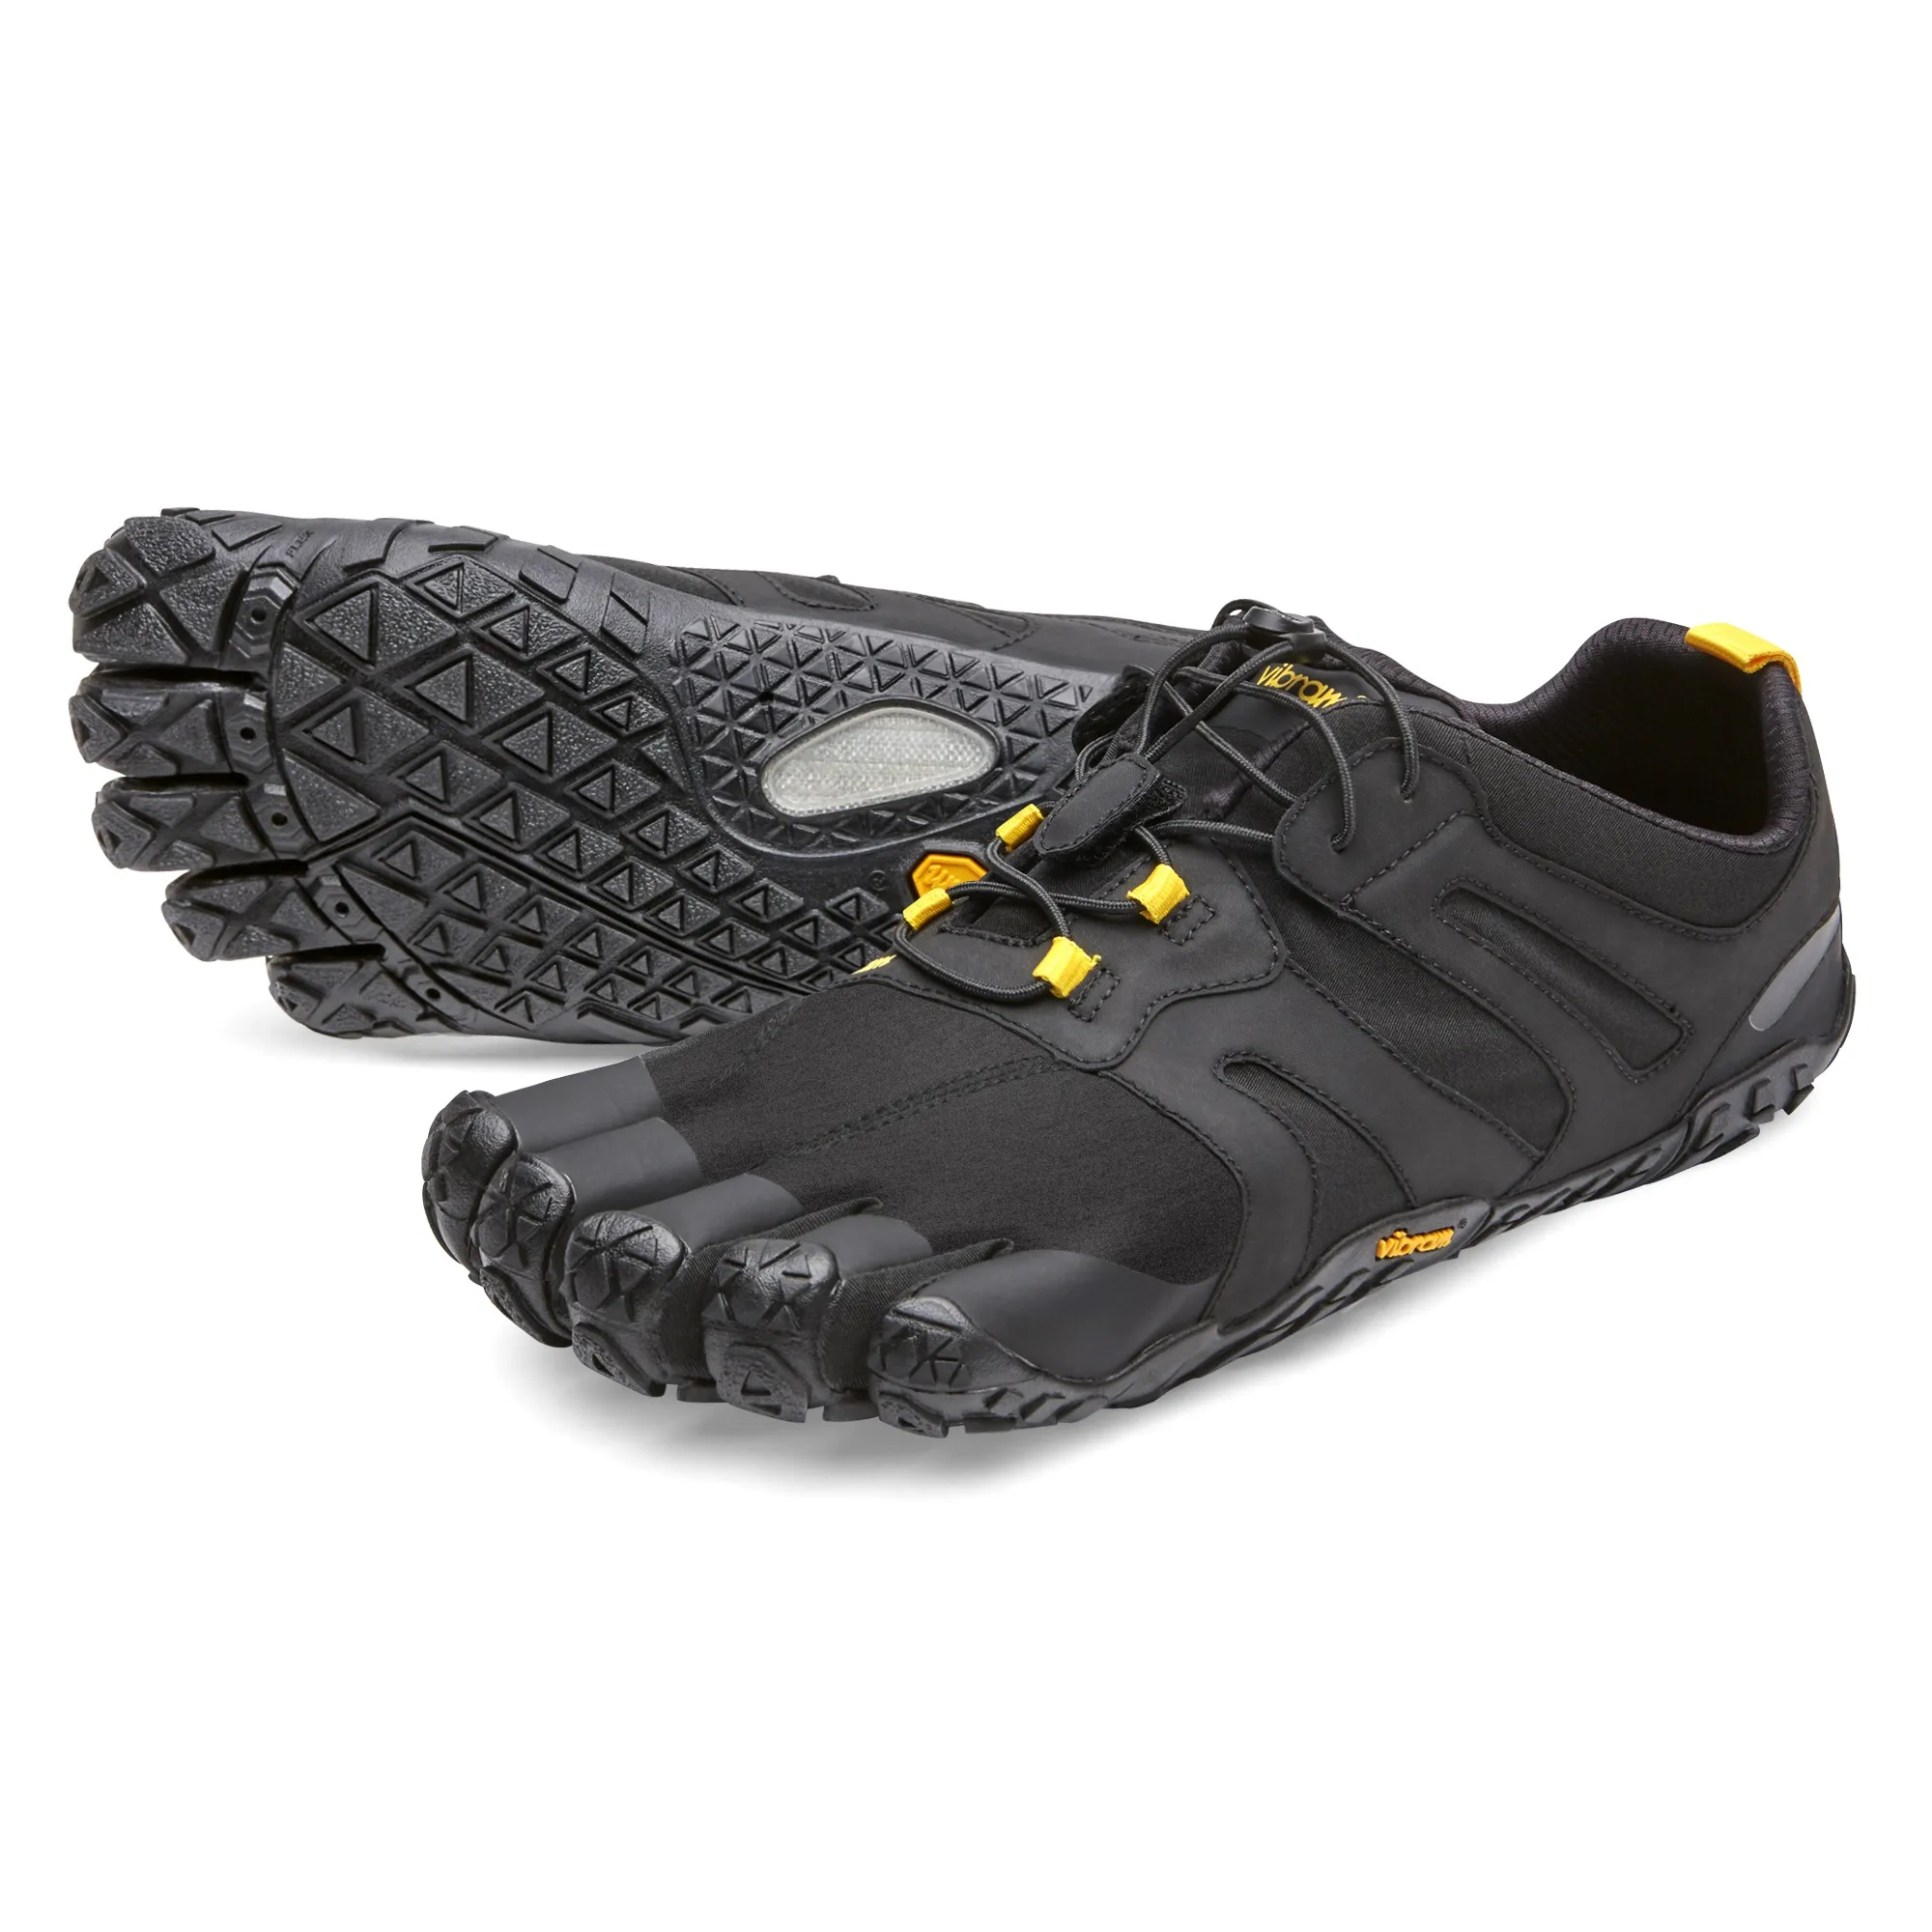 Fivefingers trailrunners